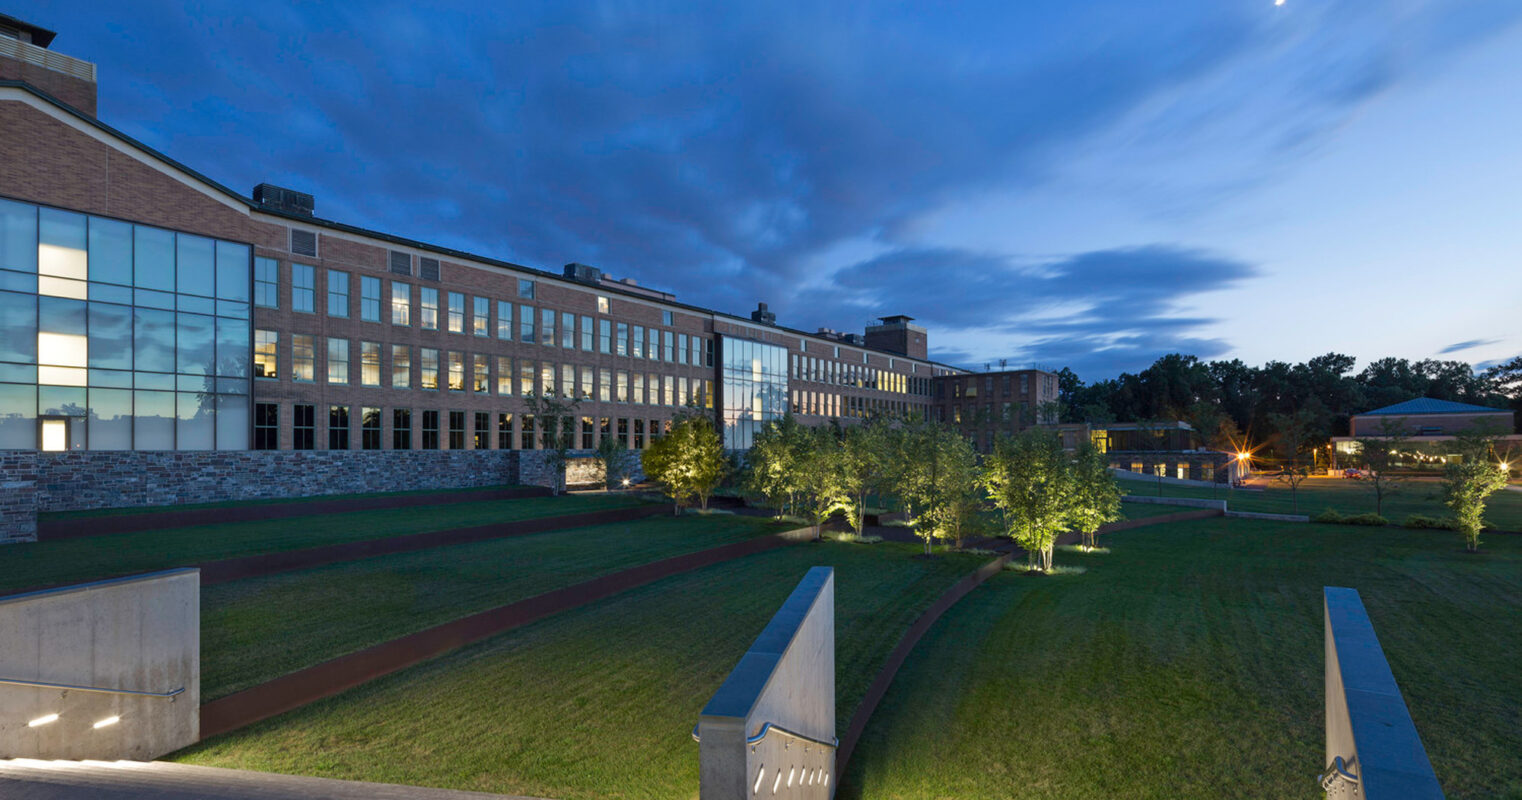 Twilight view of a modern educational building with expansive glass facade, illuminated interior rooms, stone accents, and a manicured lawn with young trees. Sleek benches and concrete pathways enhance the functional aesthetic of the outdoor space.